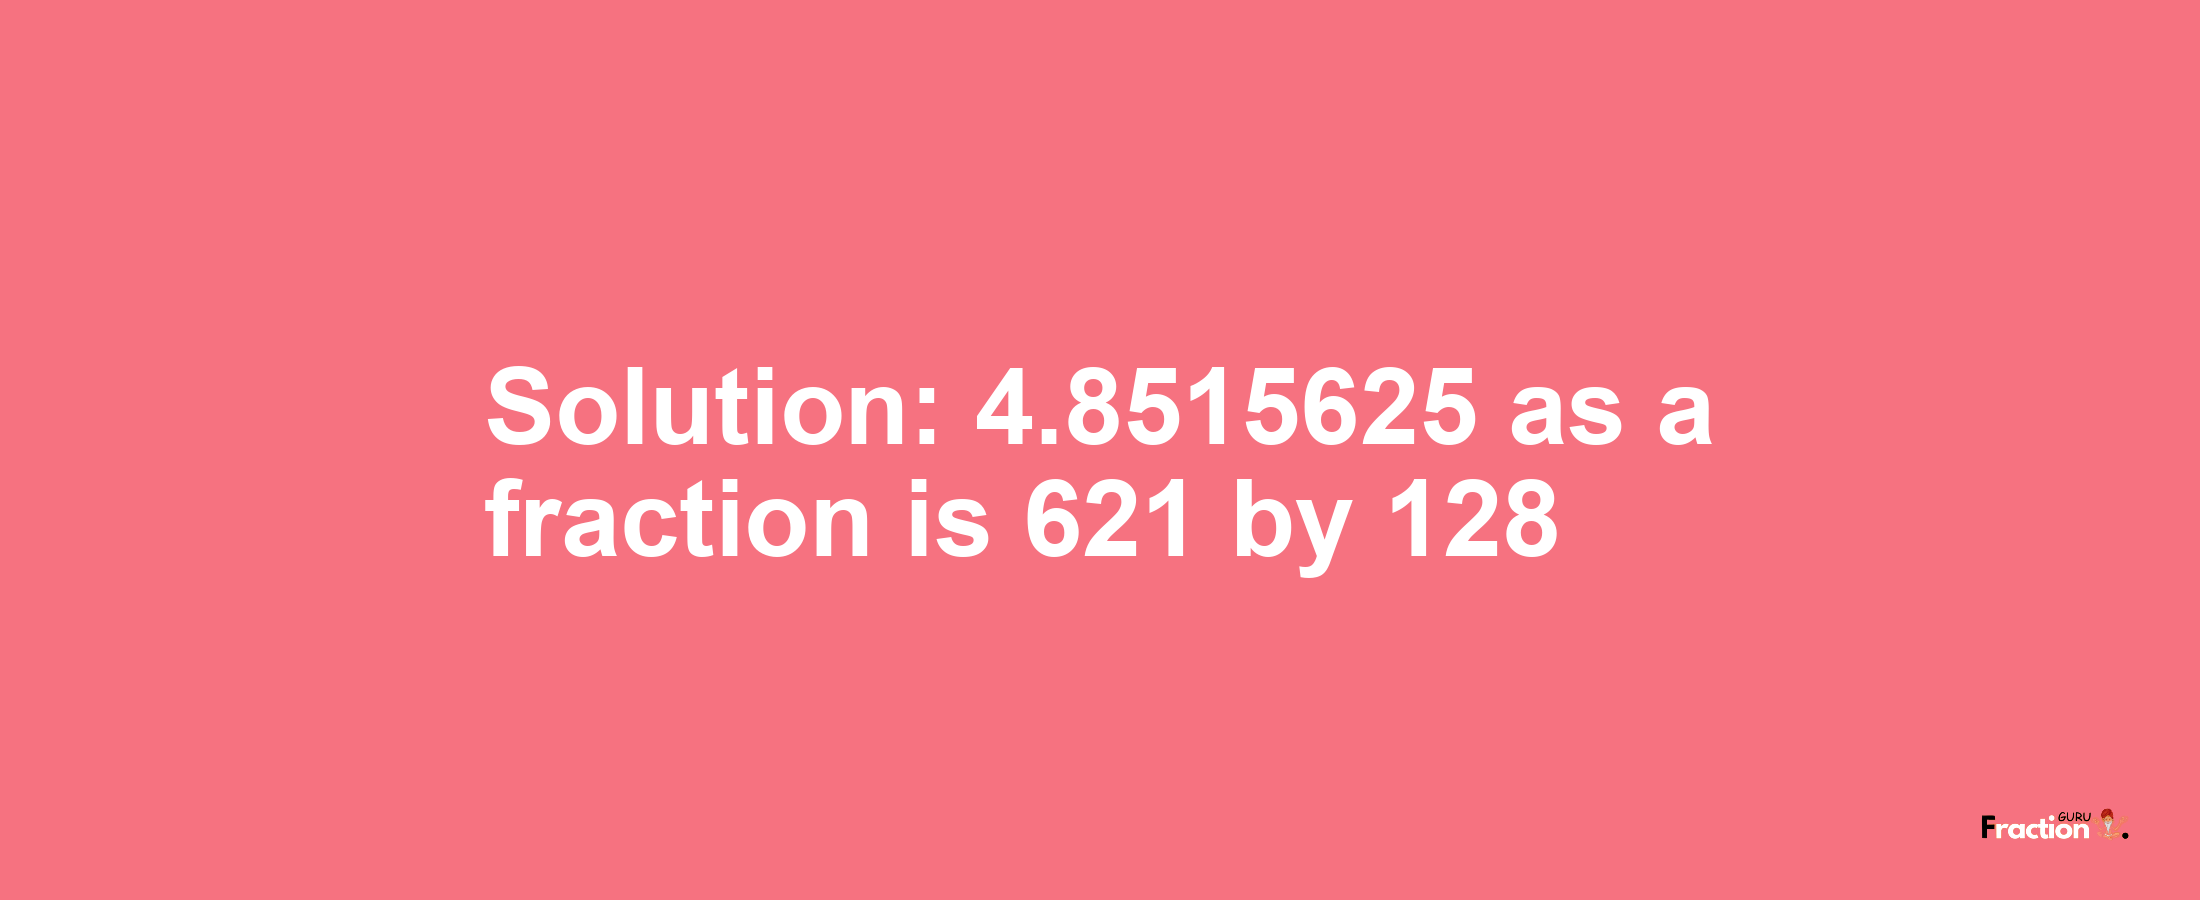 Solution:4.8515625 as a fraction is 621/128